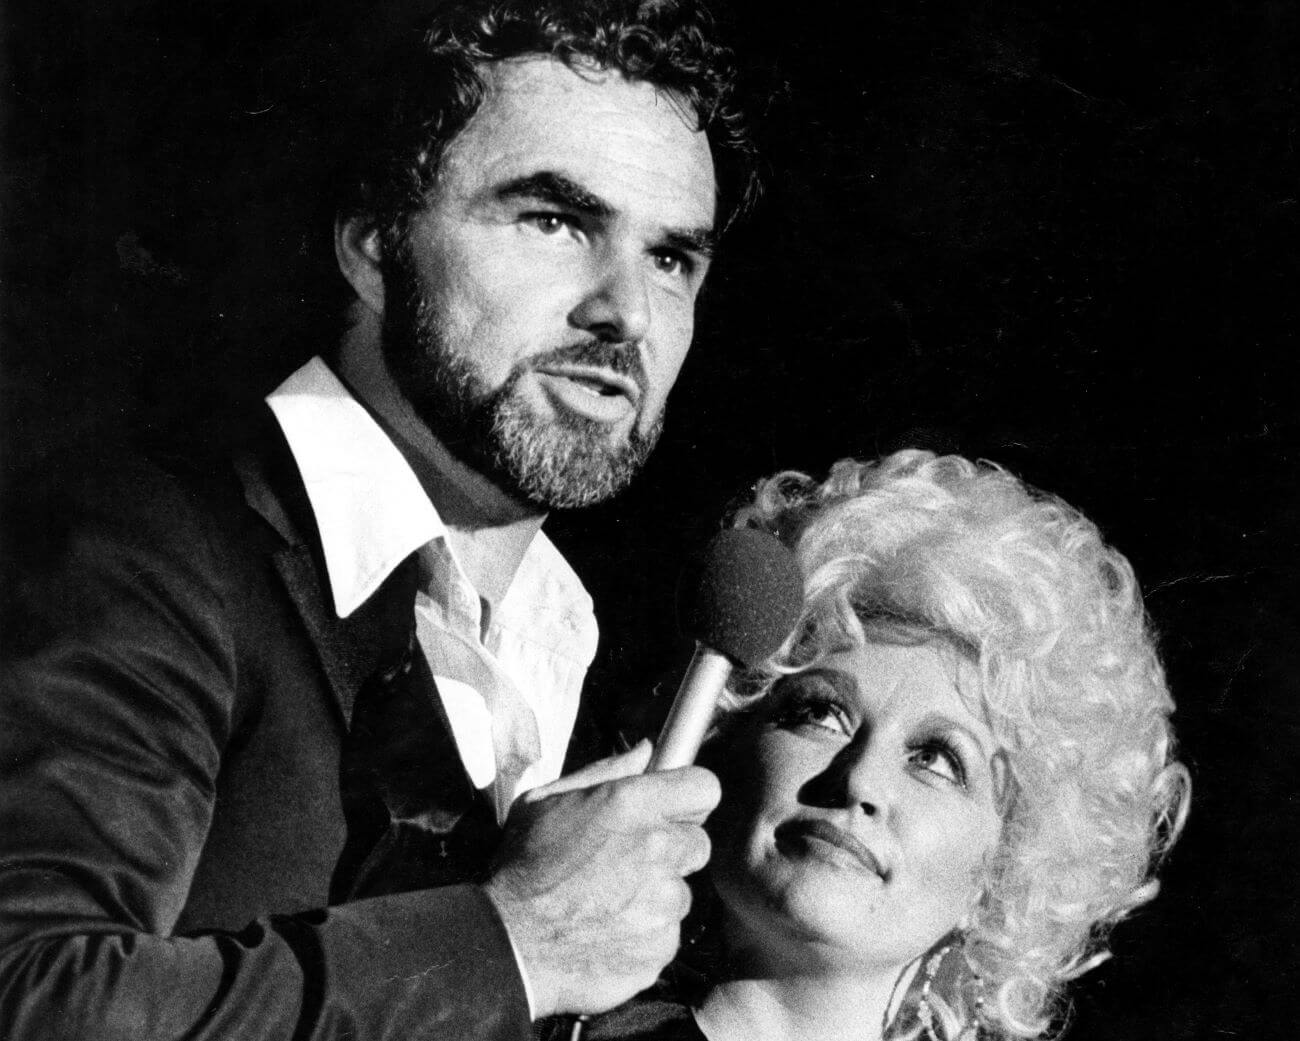 A black and white picture of Burt Reynolds speaking into a microphone while Dolly Parton looks up at him.